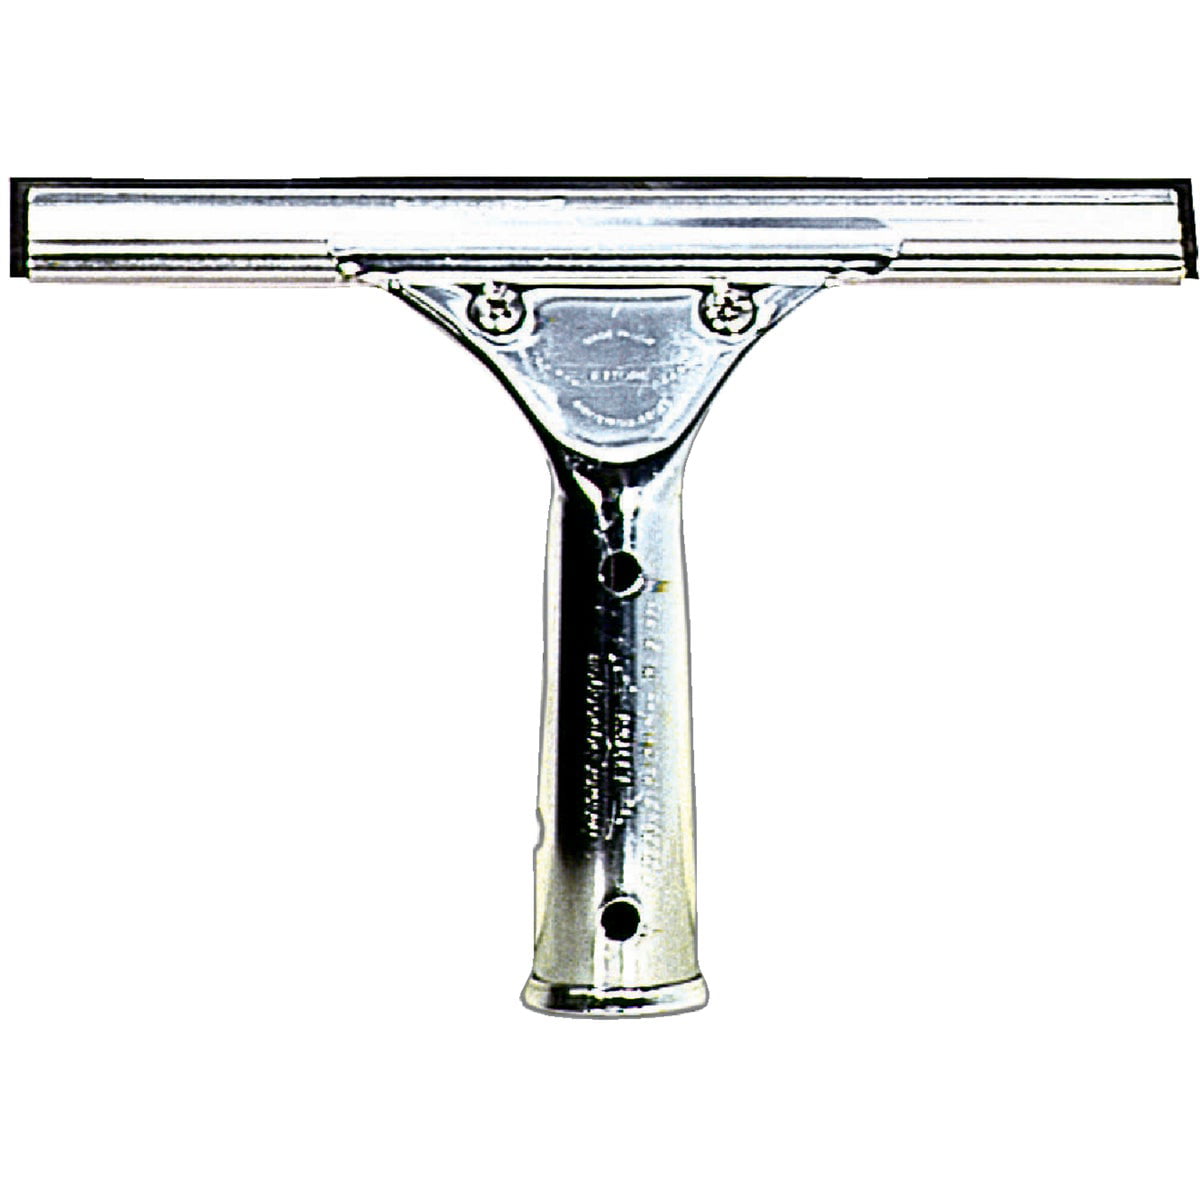 Ettore Window Wand Rubber Window Squeegee in the Squeegees department at